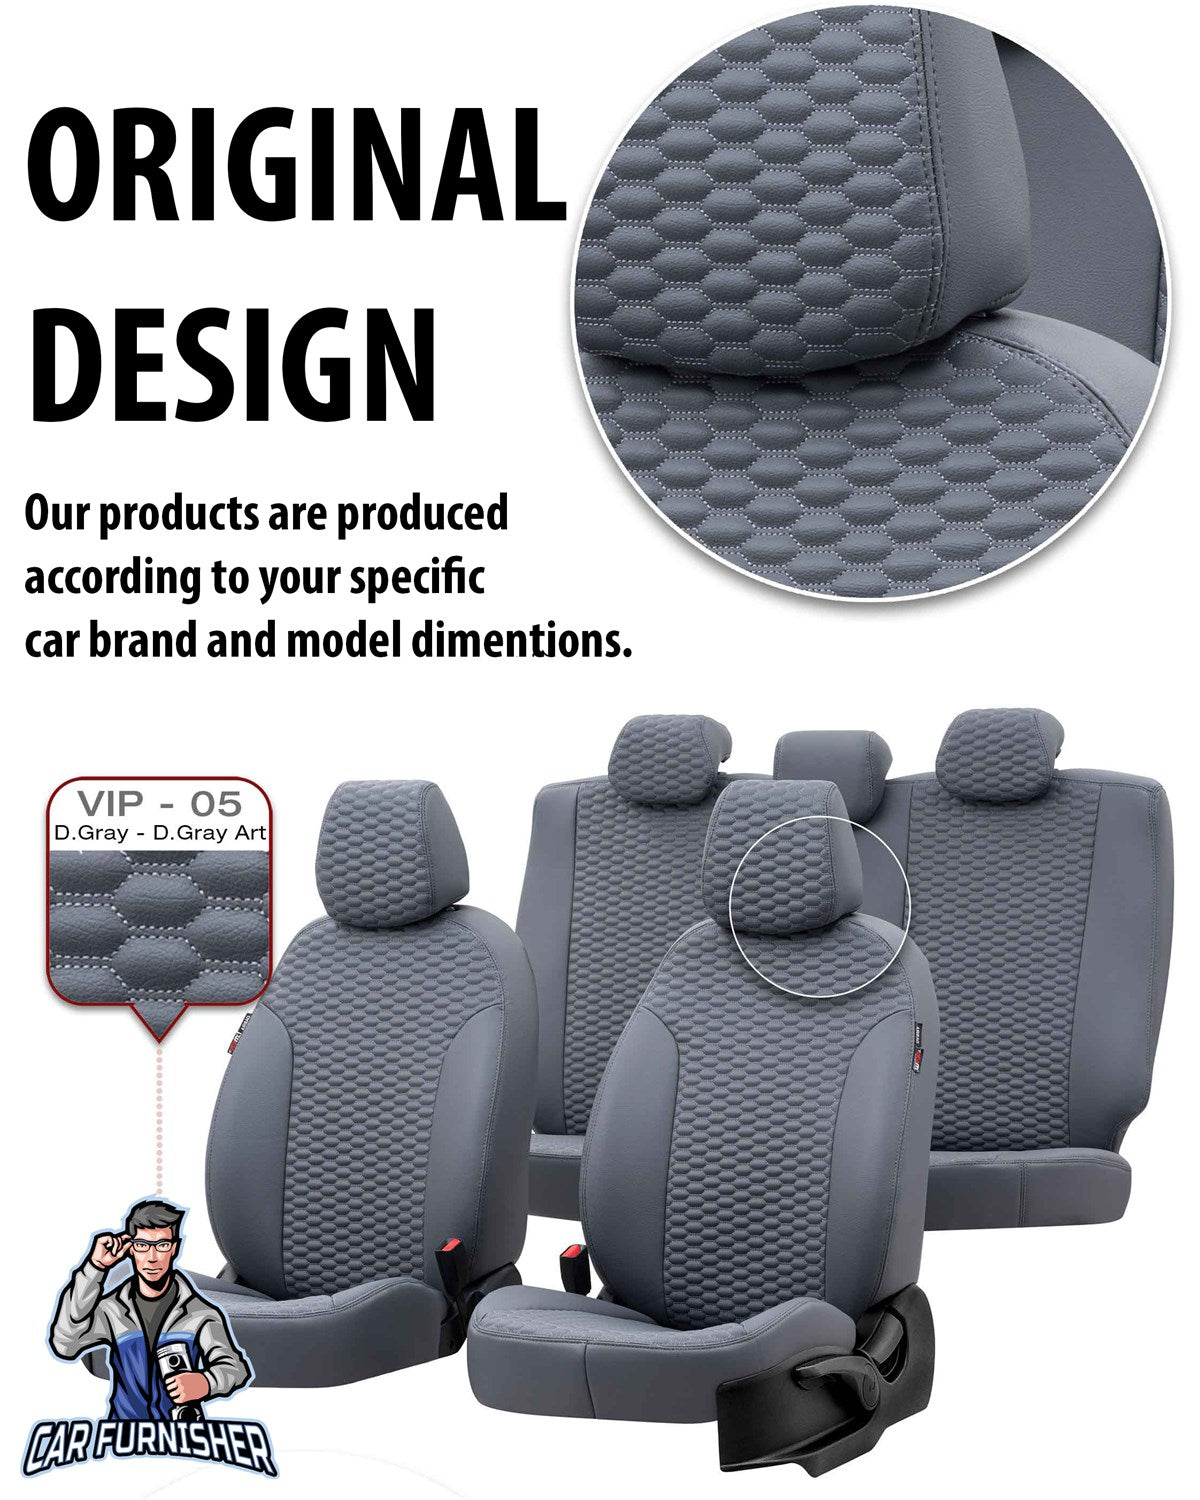 Ford Transit Custom Seat Covers Tokyo Leather Design Beige Leather